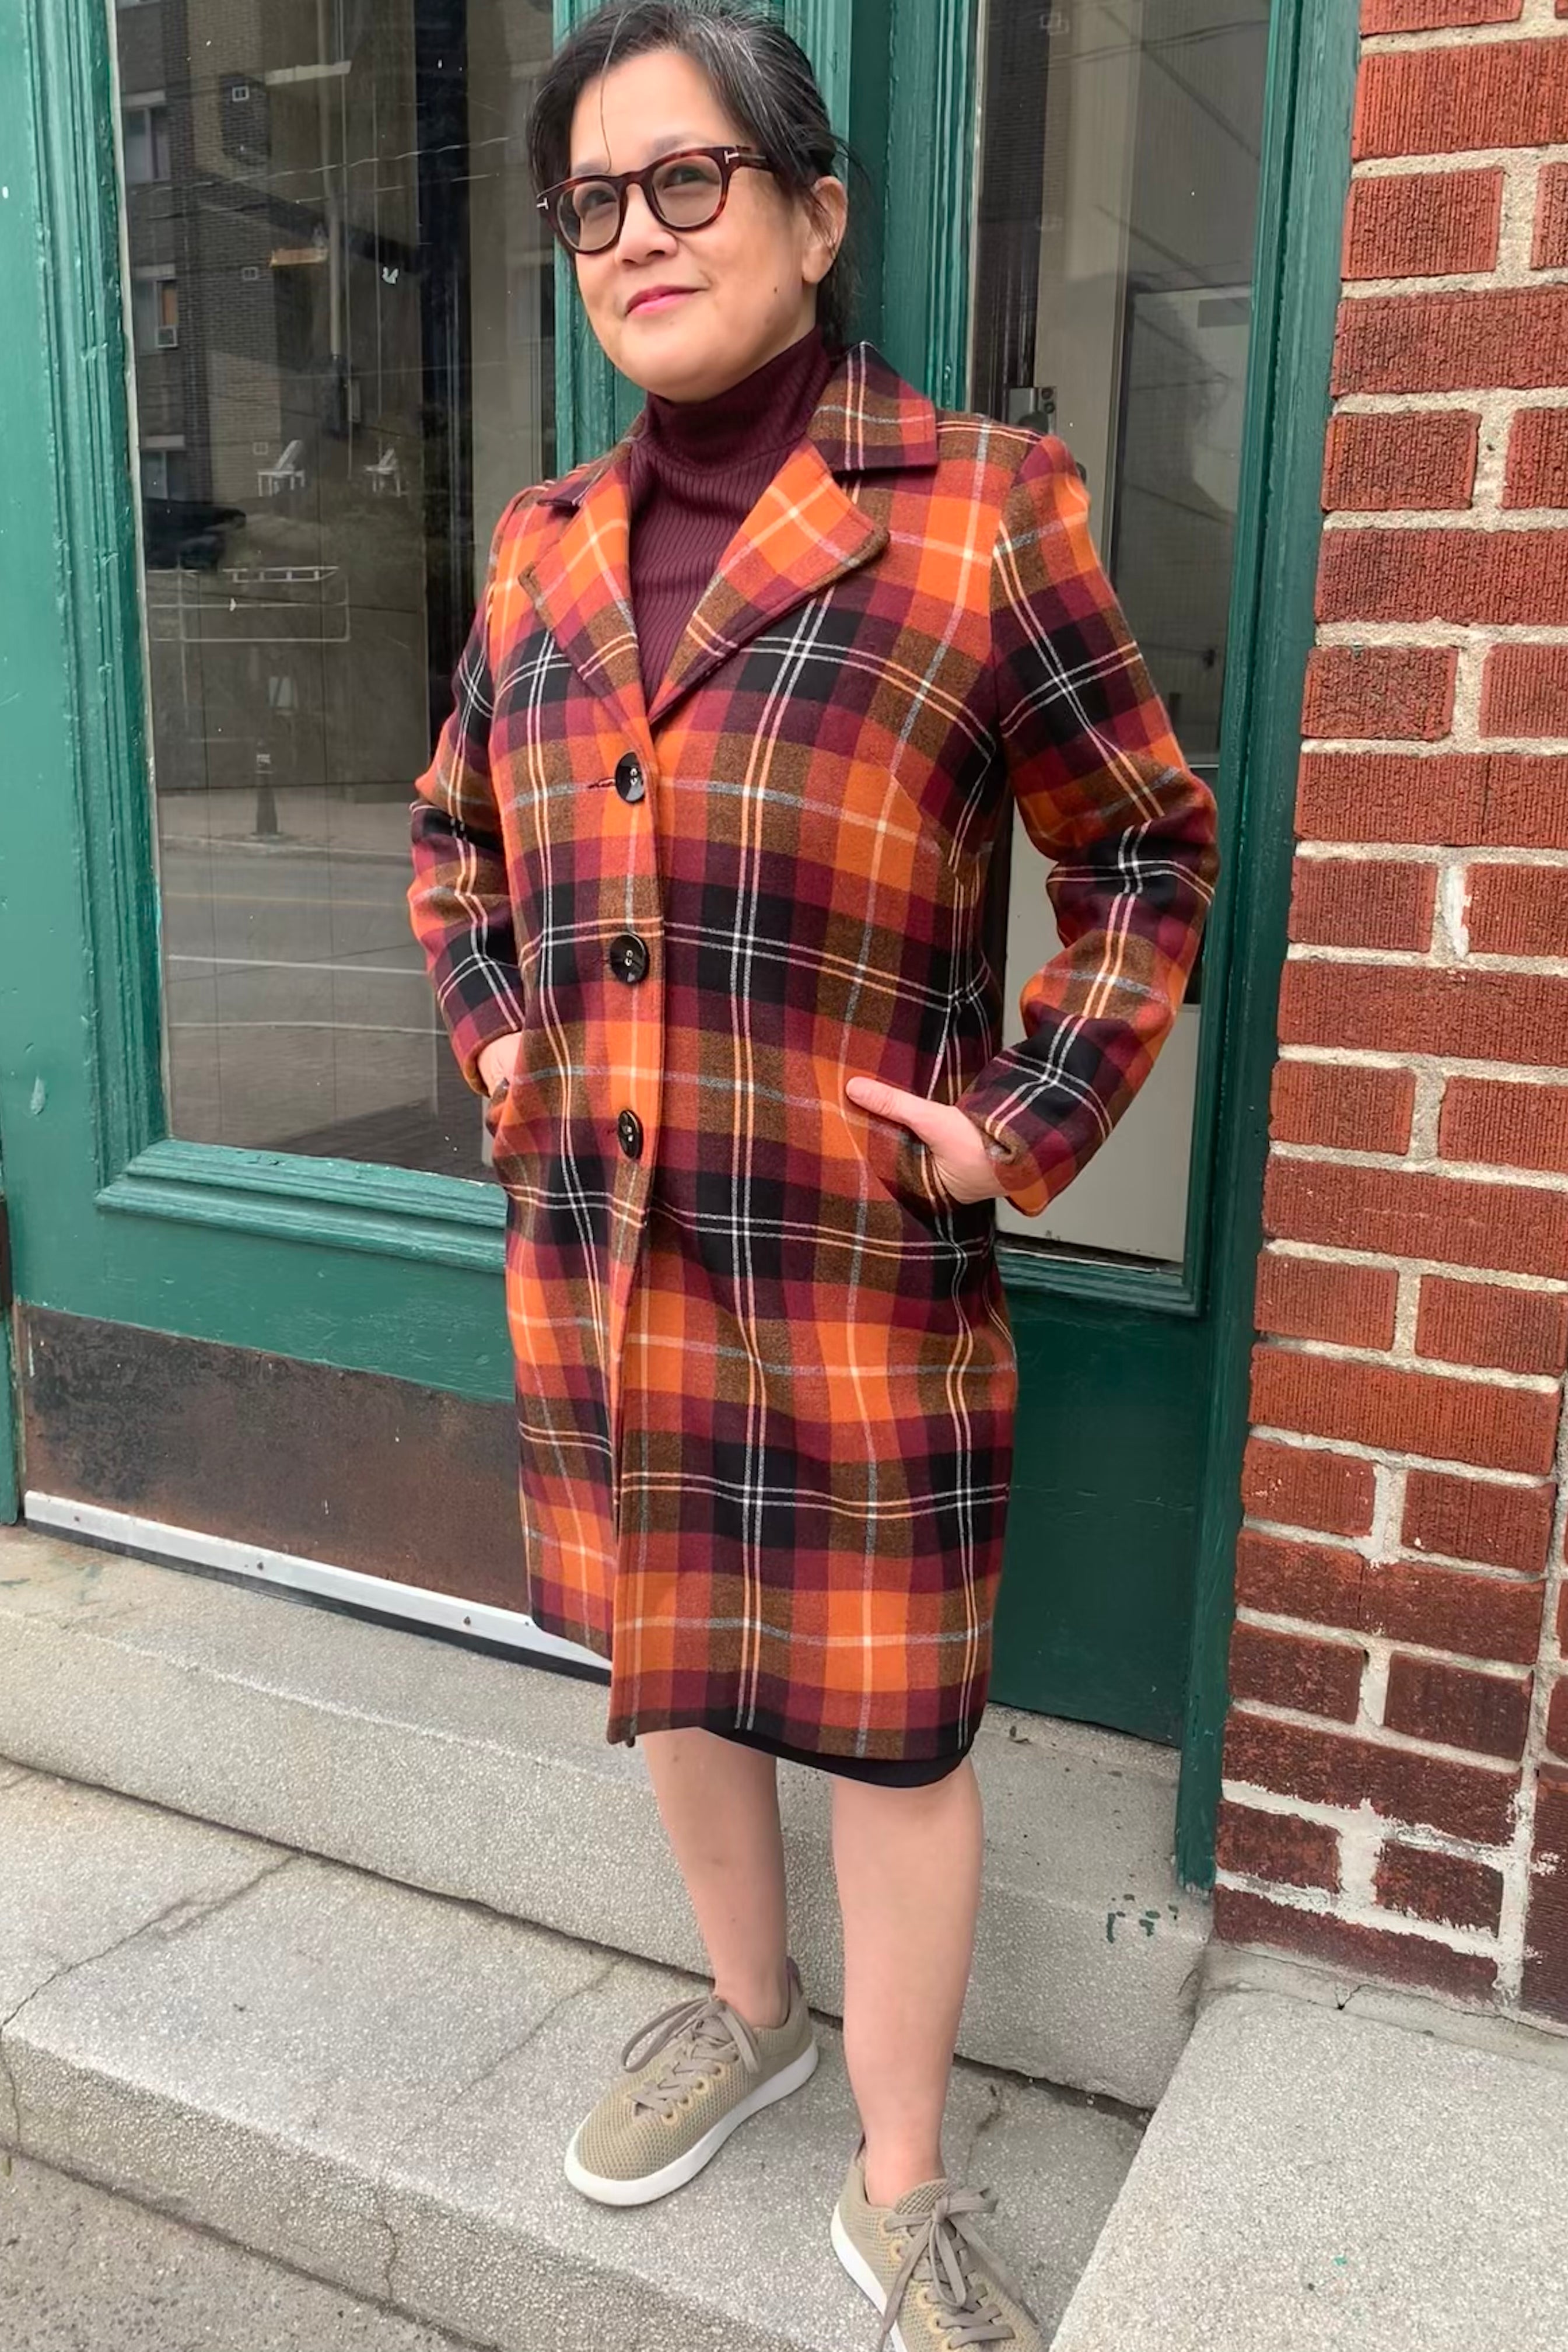 Sybille Coat by Luc Fontaine, Orange, wide lapels, buttons up the front, pockets, above the knee, sizes 4-16, made in Canada